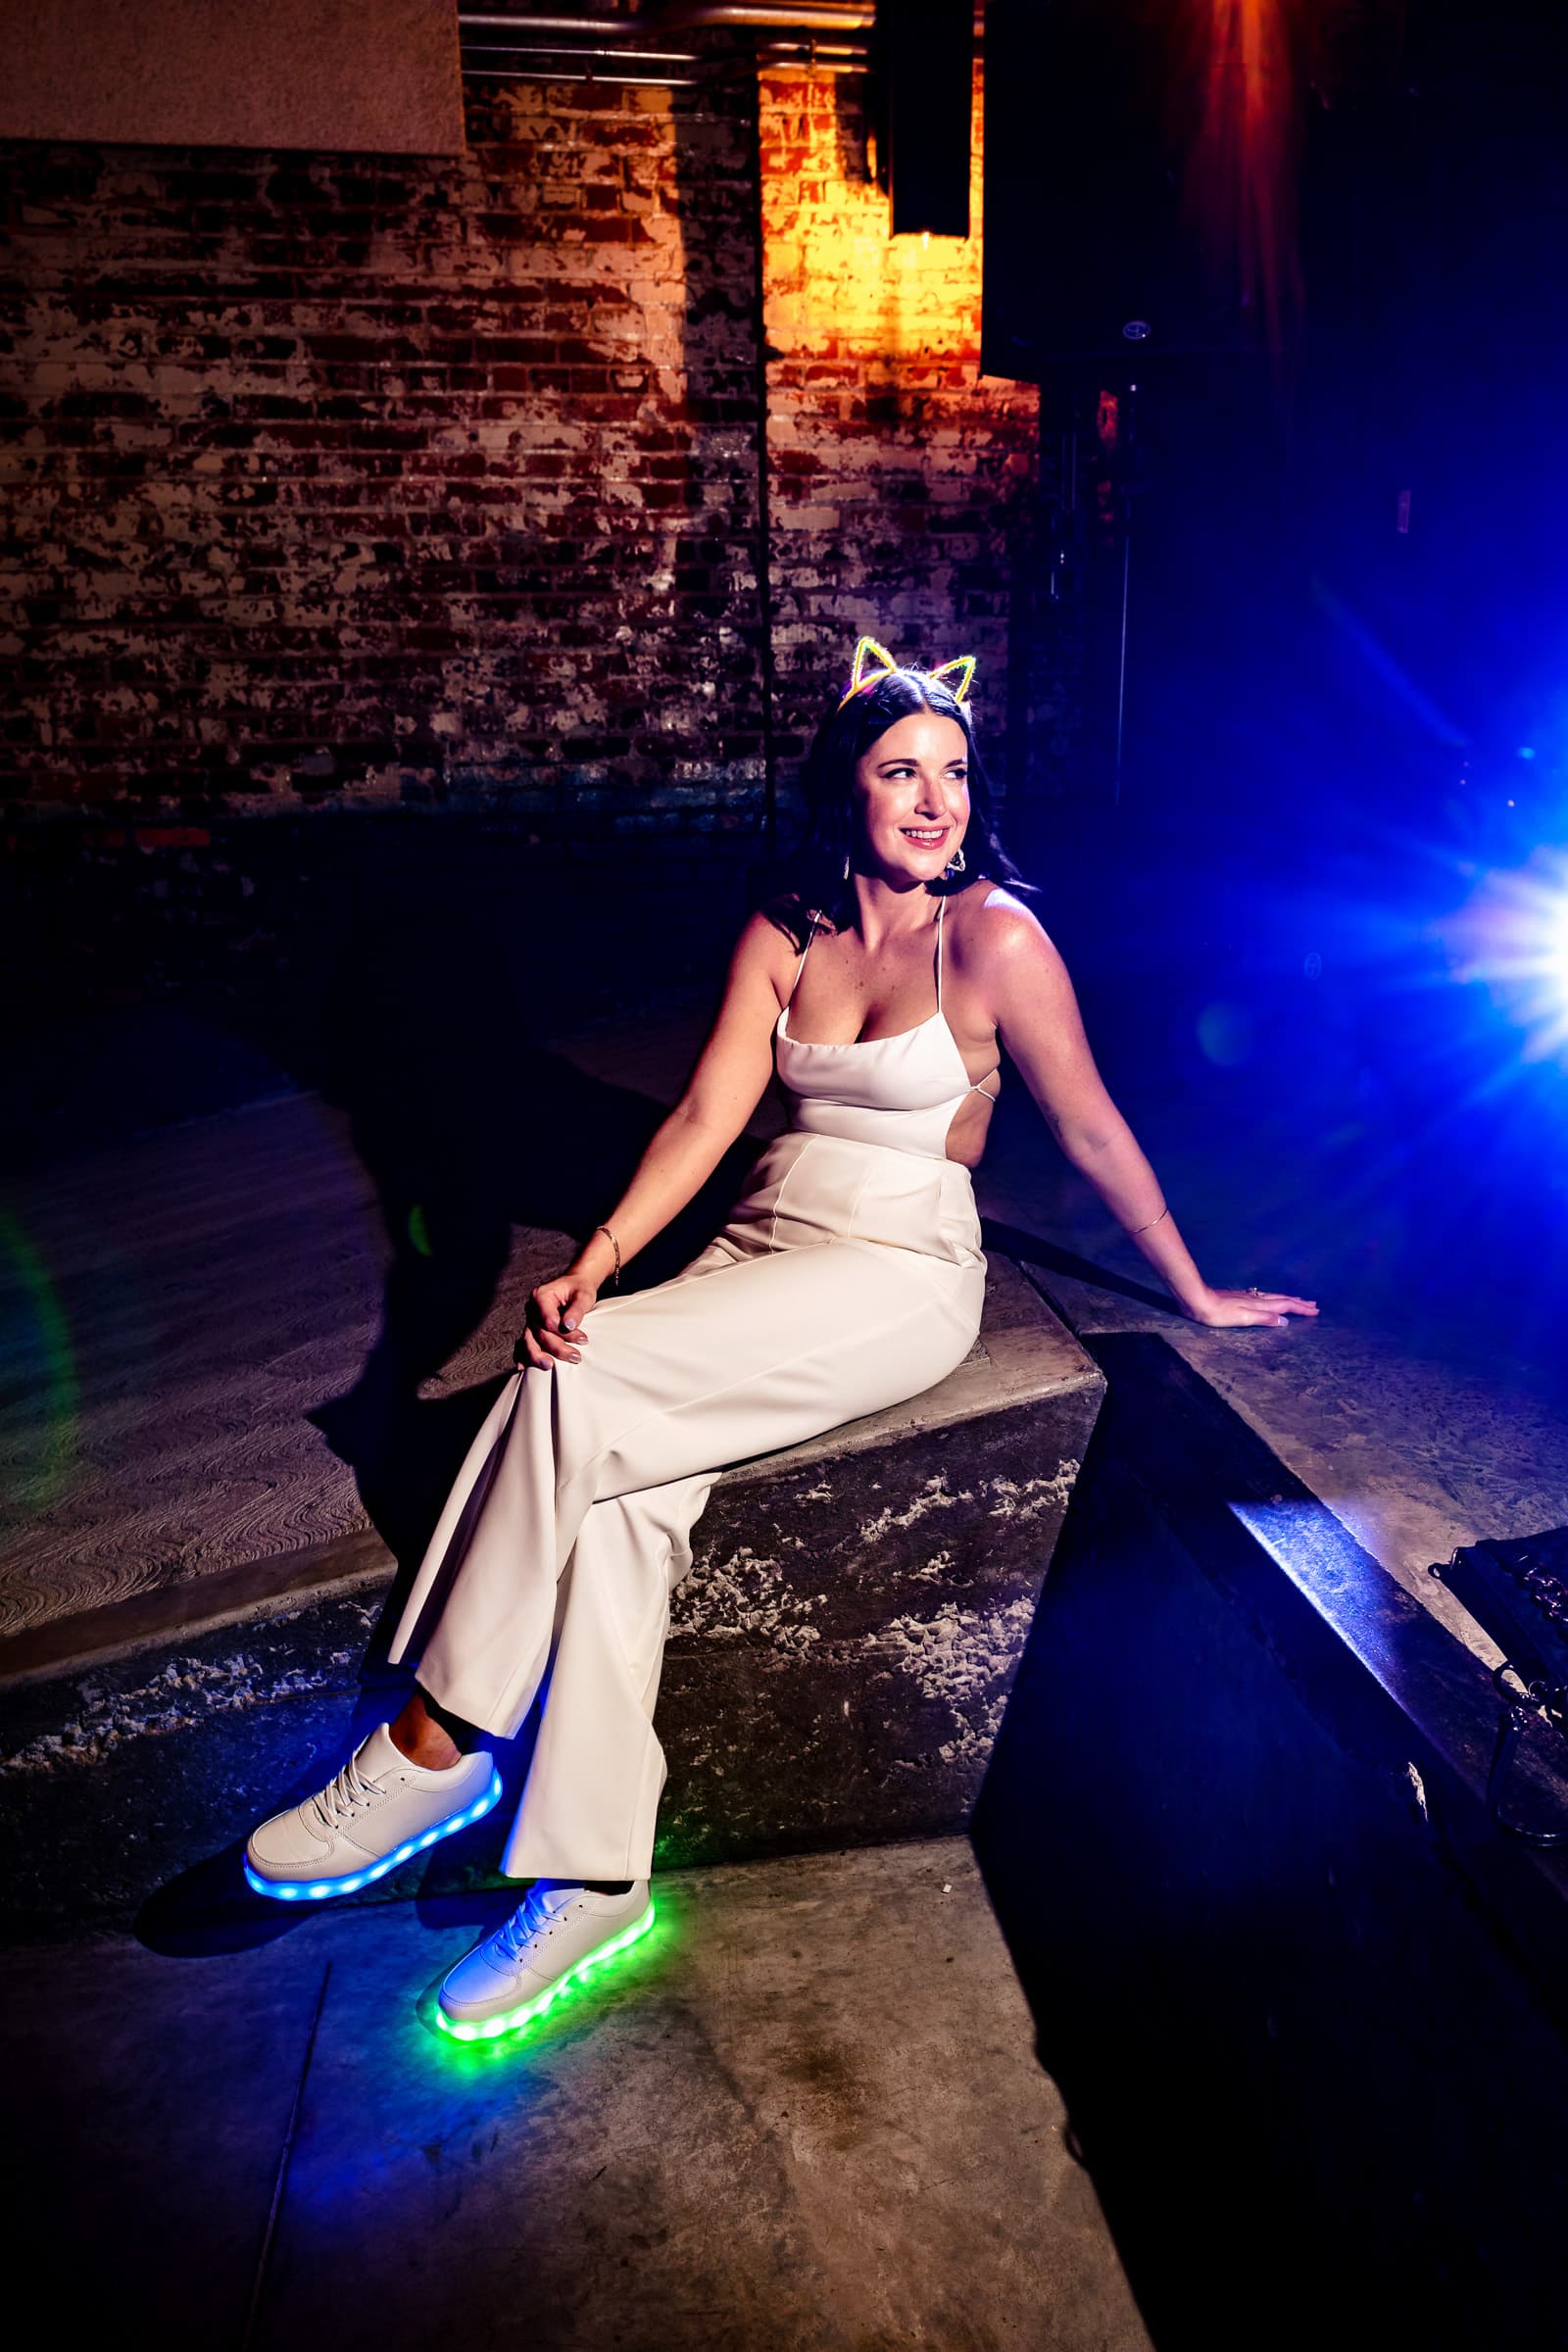 This bride changed into a white jumpsuit and light up sneakers for part of her wedding reception | photos by Kivus & Camera